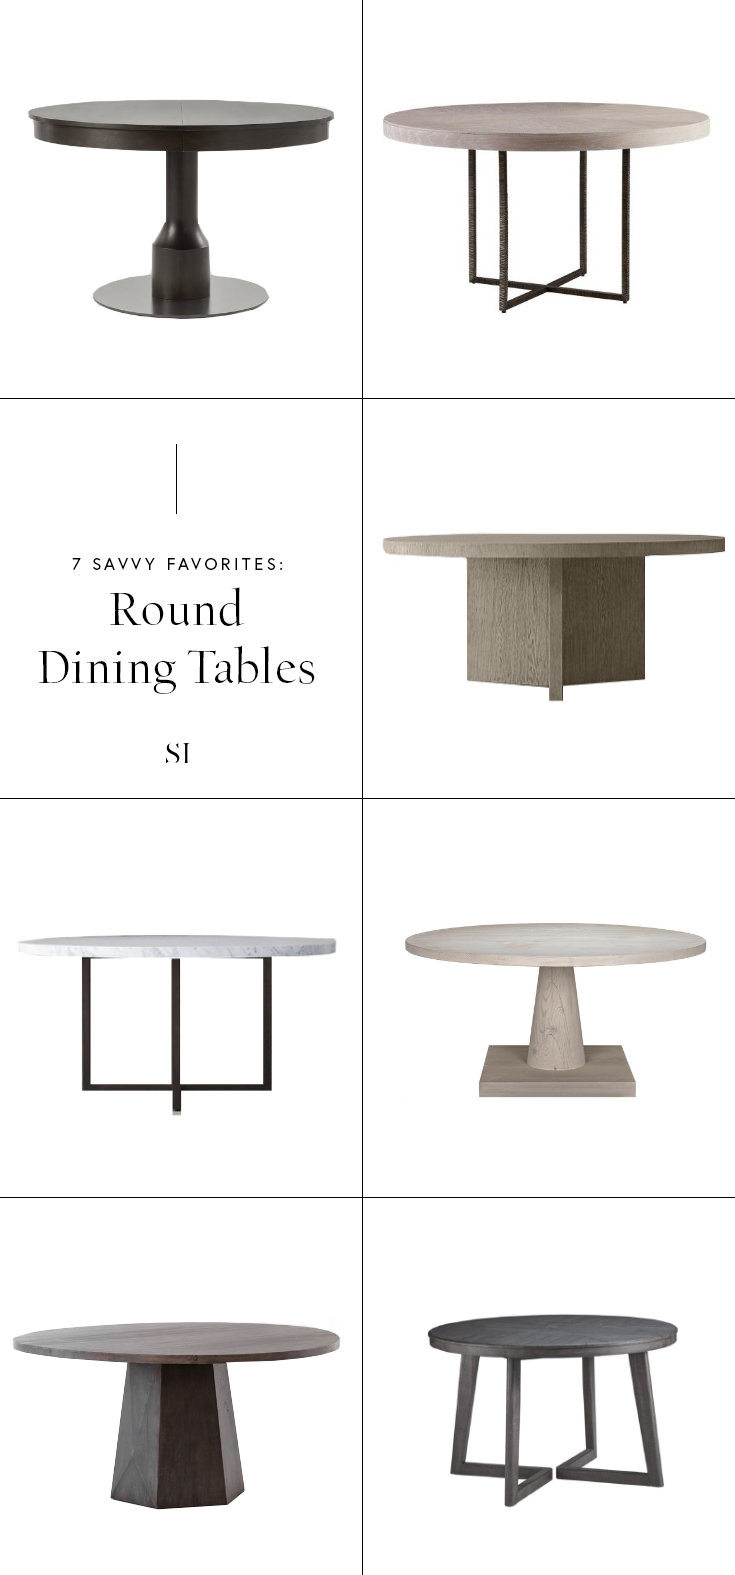 7 Savvy Favorites: Contemporary & Modern Round Dining Room Tables —  The Savvy Heart